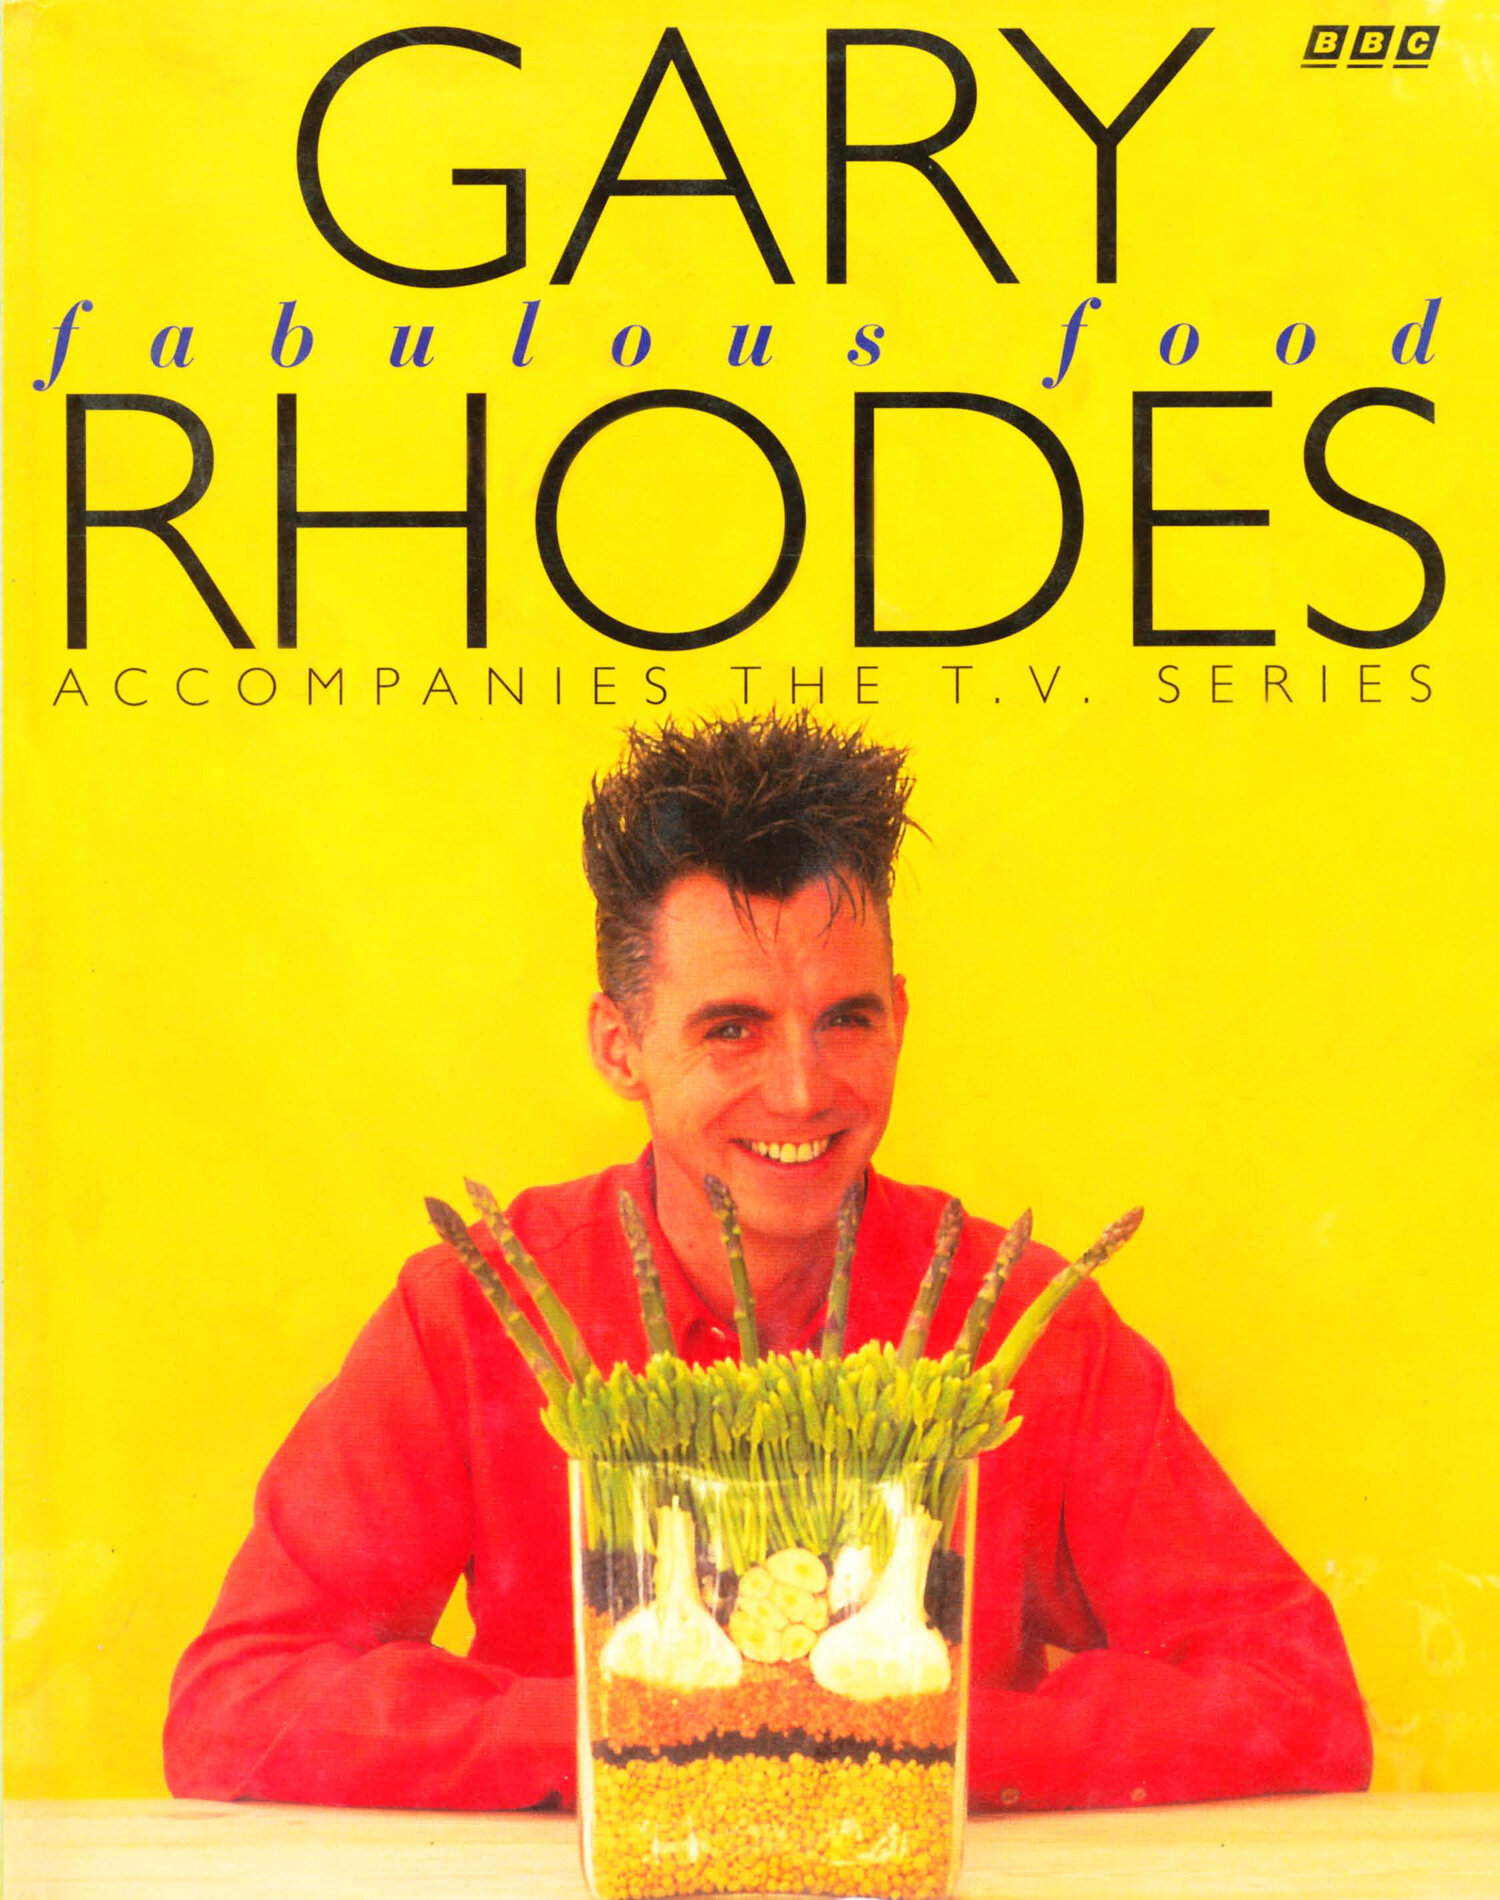 Cover of Fabulous Food, cookbook by Gary Rhodes